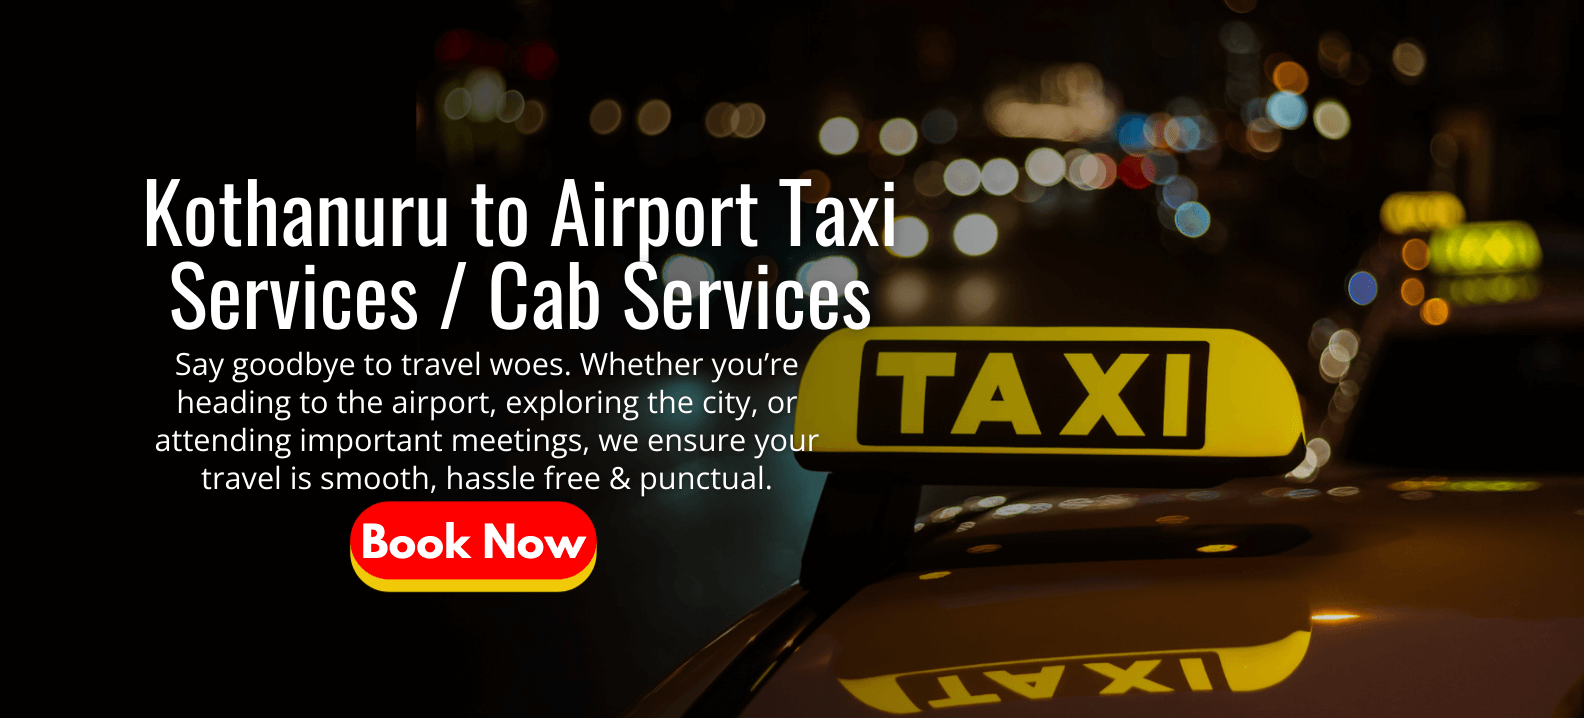 Kothanuru to Airport Taxi Services _ Cab Services